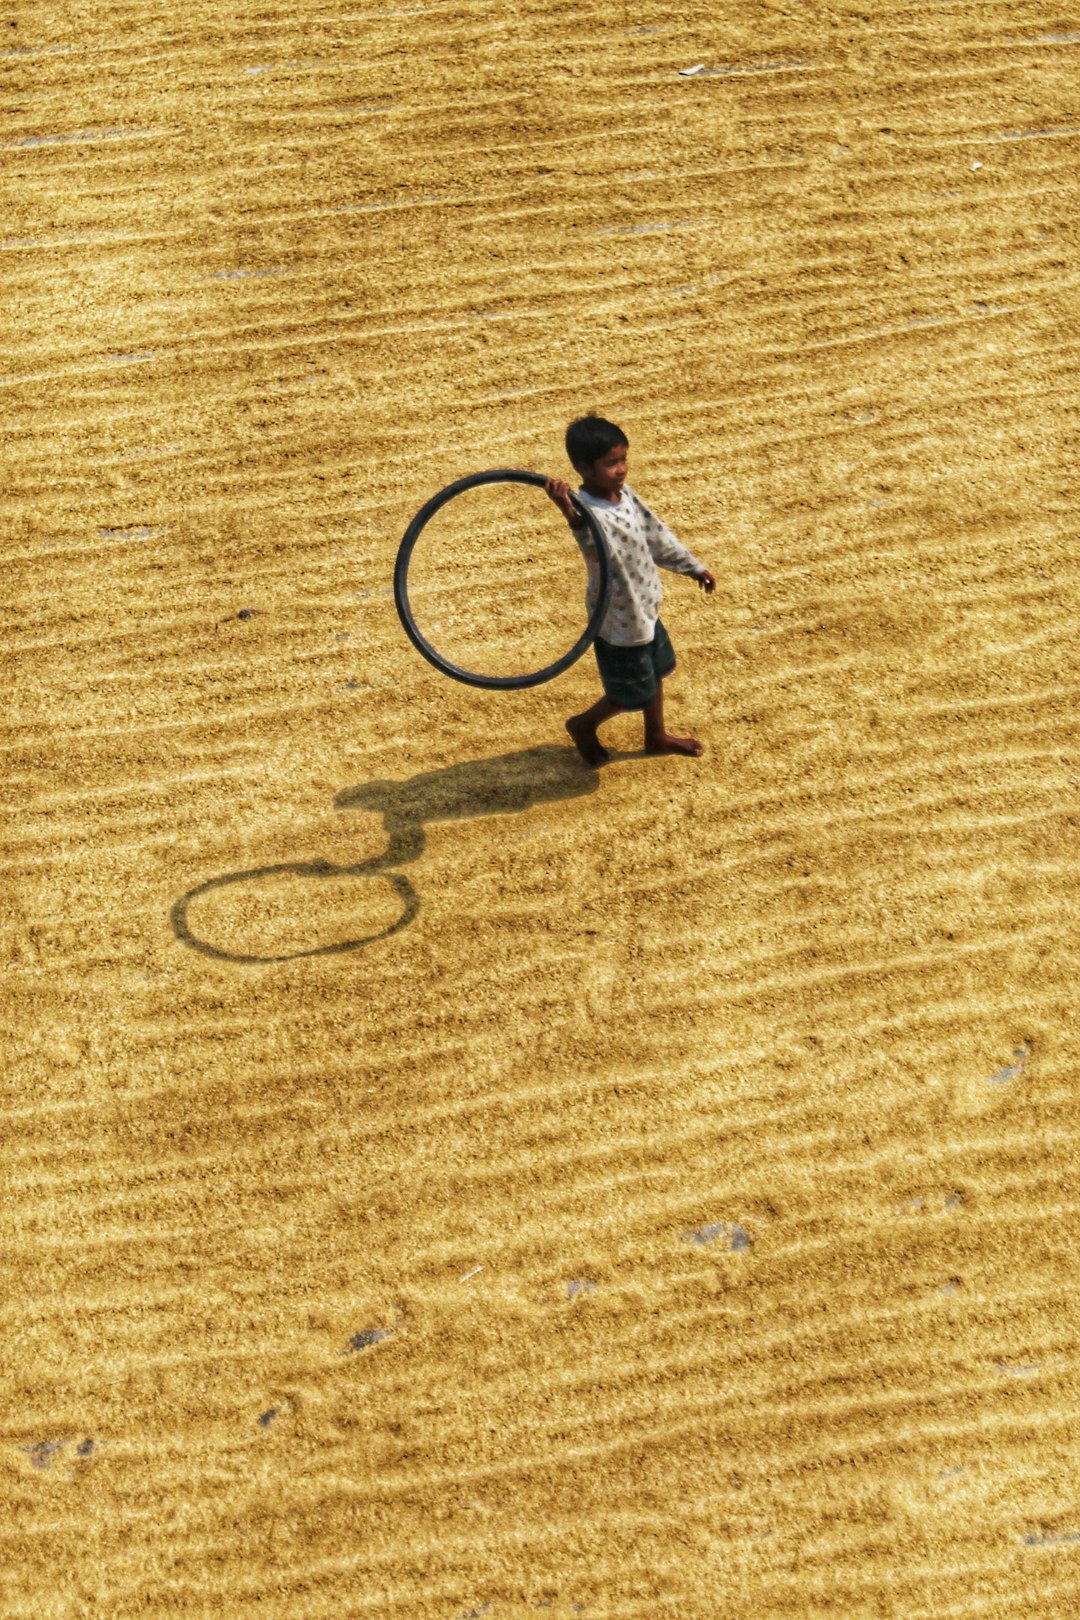 child in white shirt and blue denim jeans playing on brown field during daytime